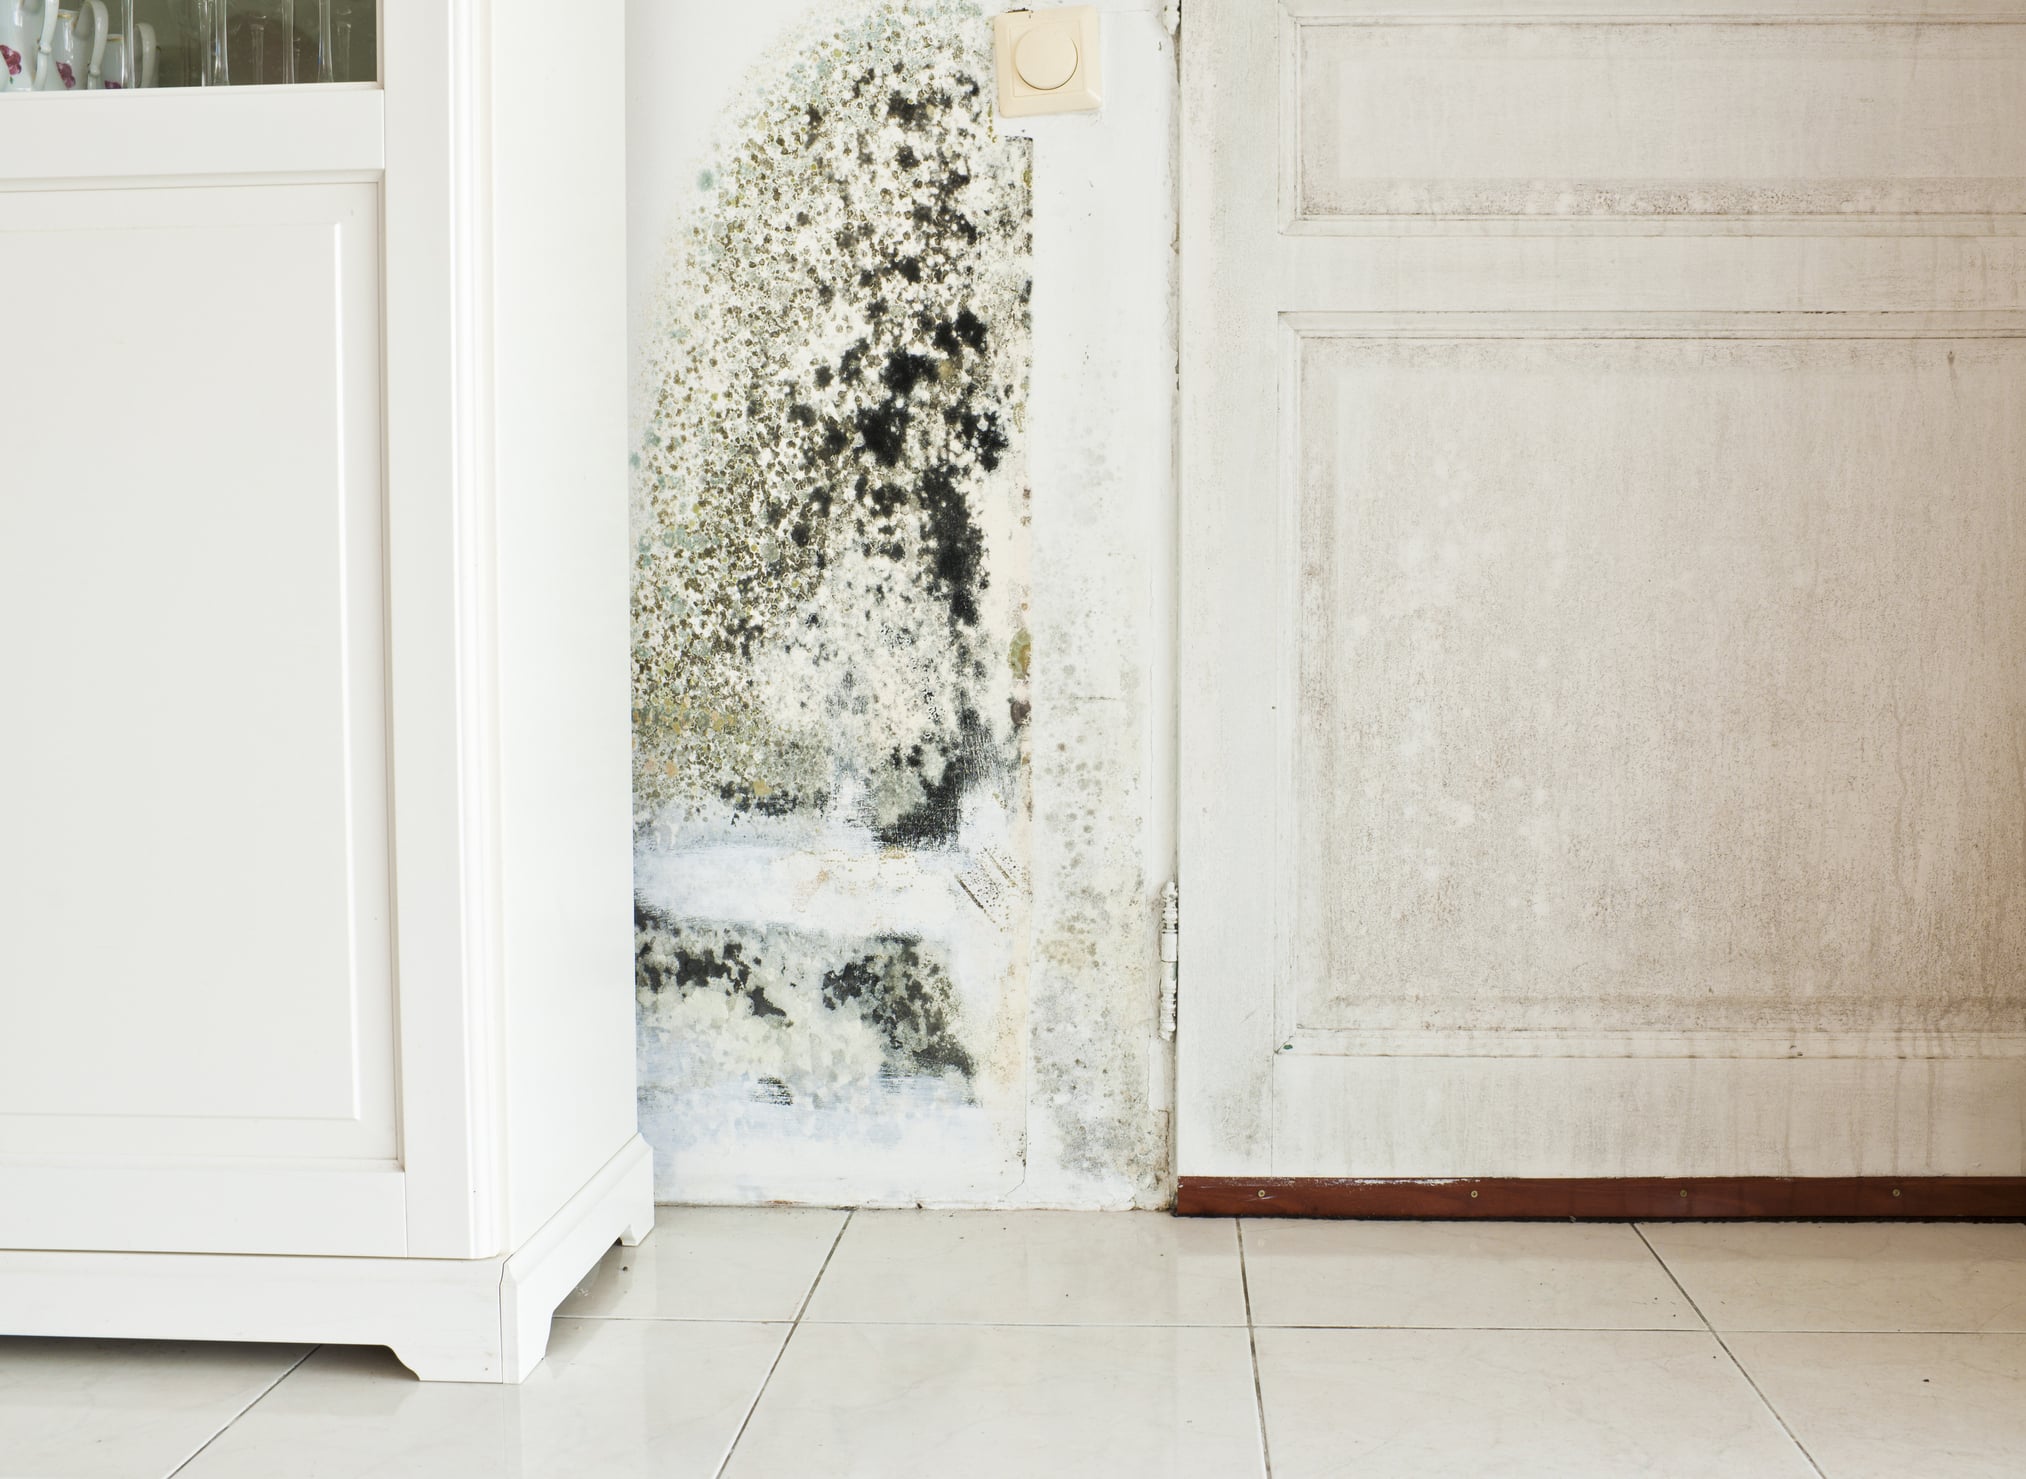 Most Common Types of Mold